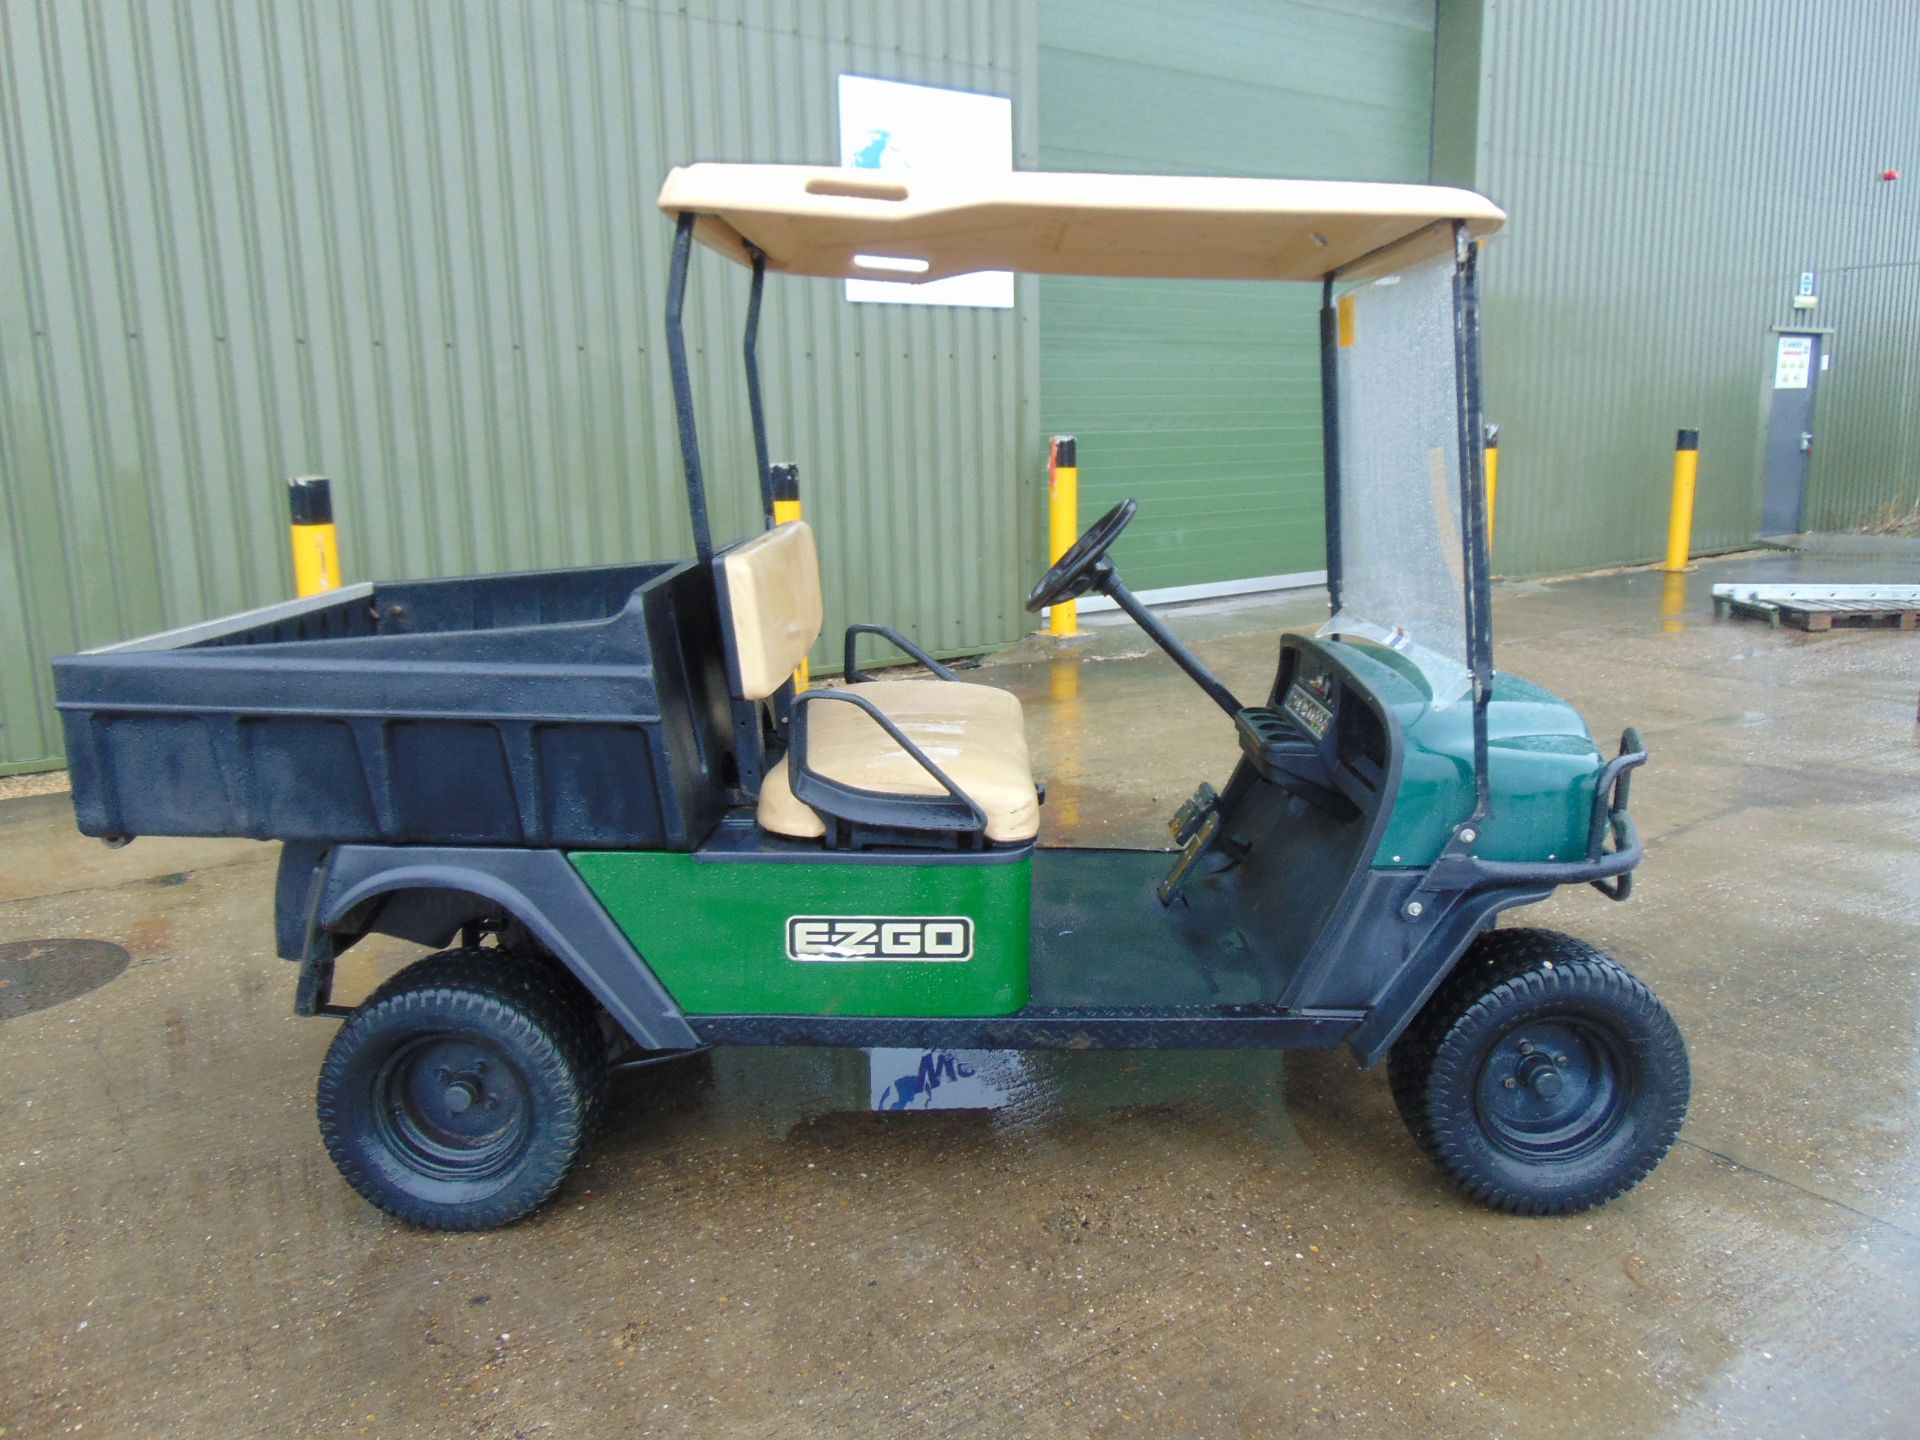 E-Z-GO Lifted Estate/Grounds Vehicle c/w Tipping Rear Body Only 889 Hours! - Image 5 of 21